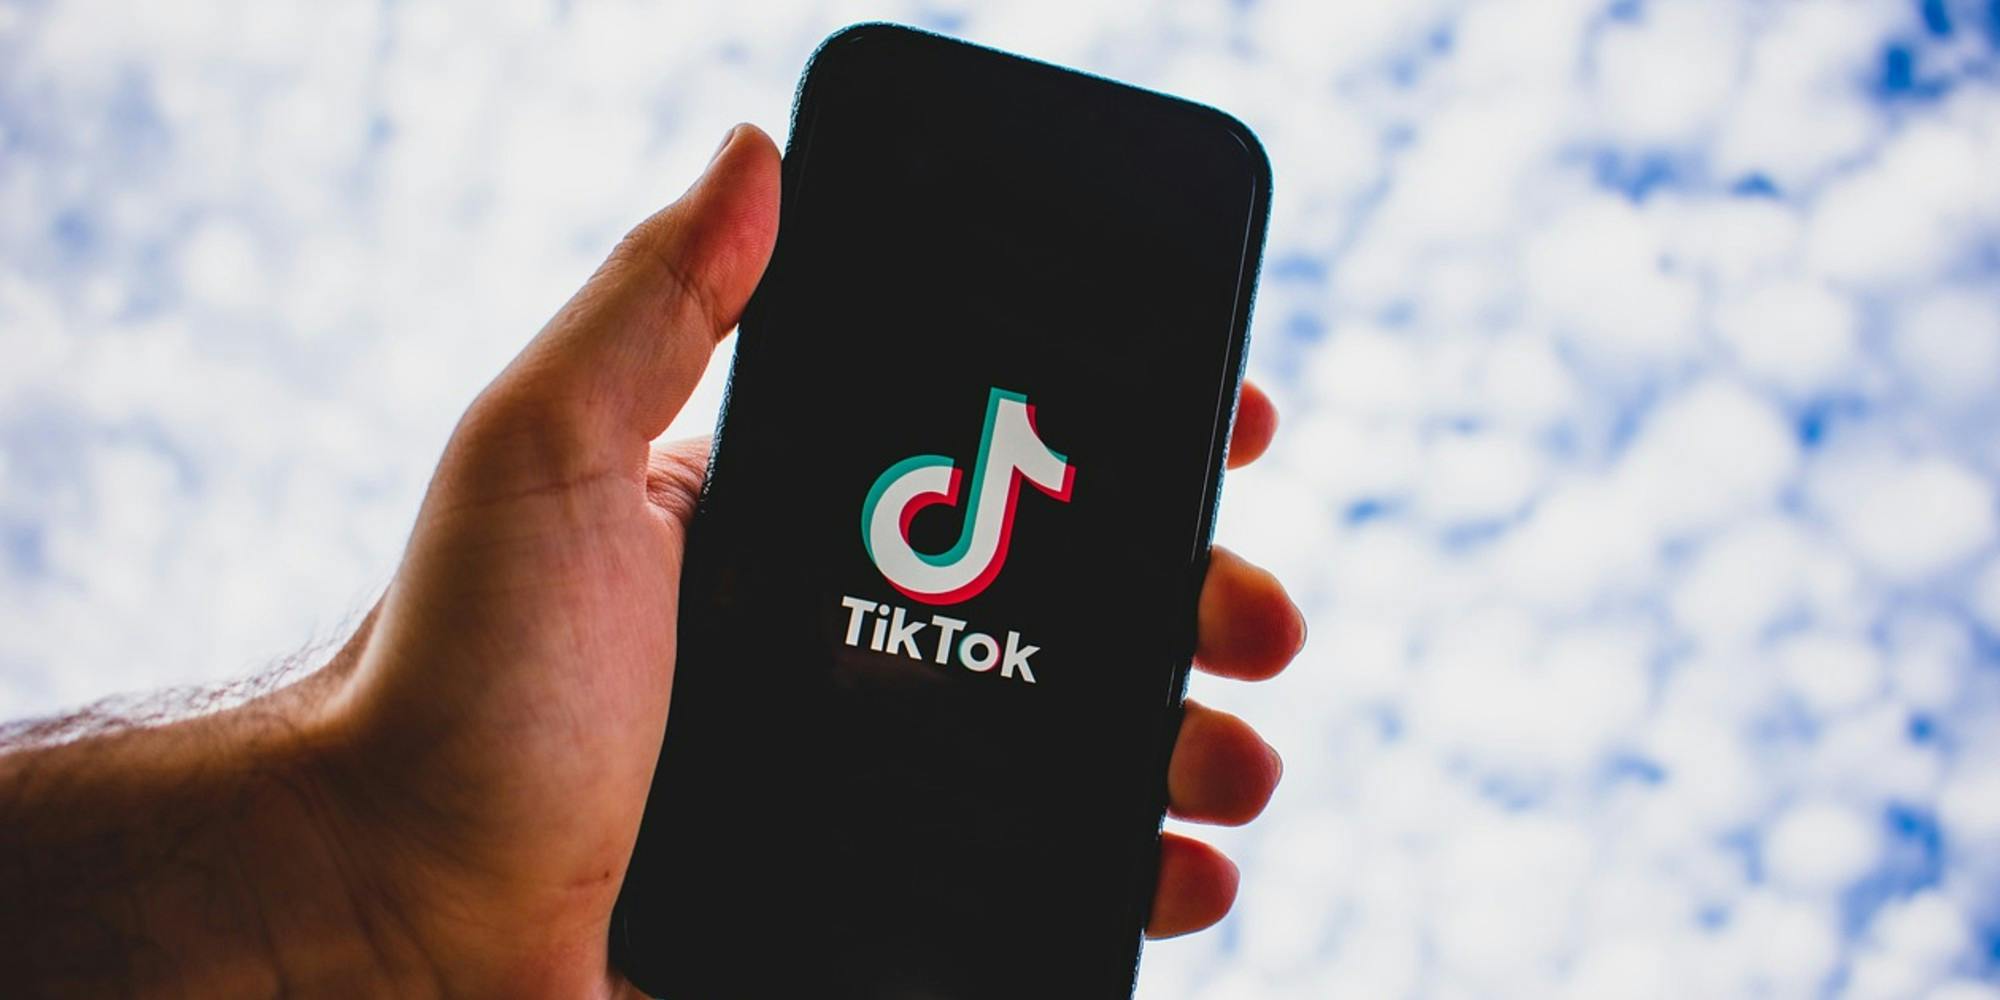 A person holding a phone with the TikTok app